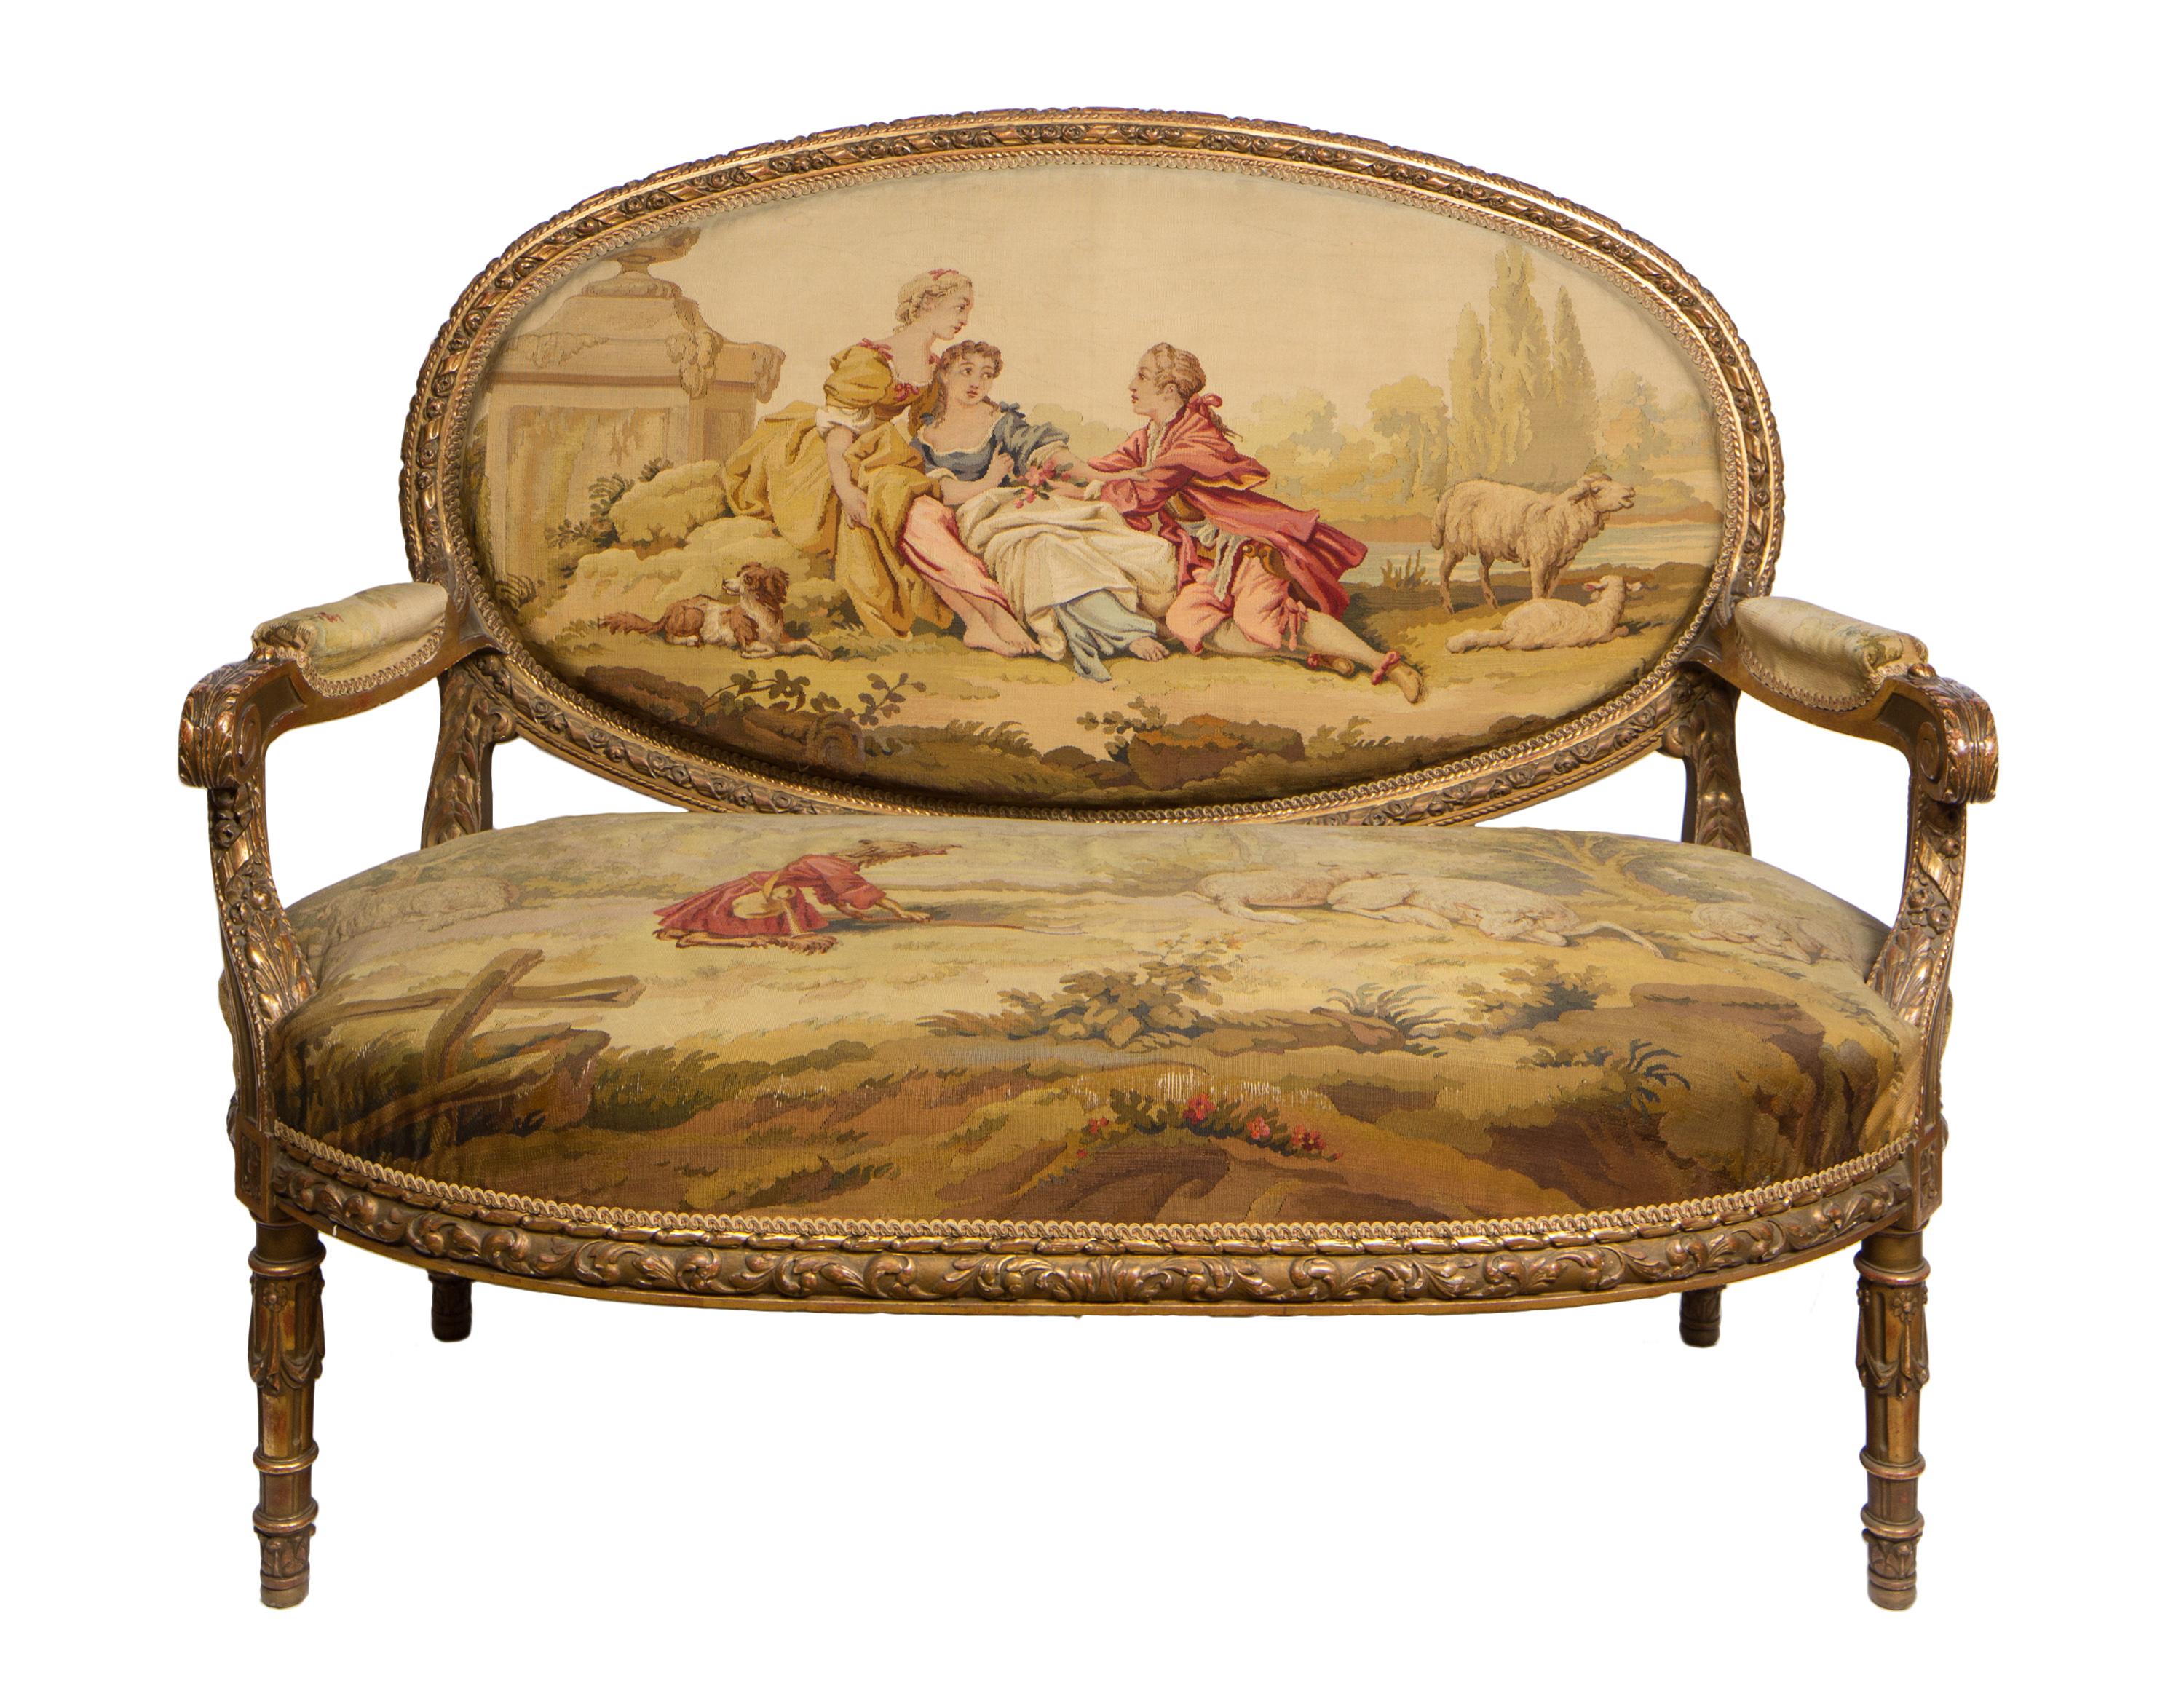 Upholstered in fine Aubusson tapestry fabric, this 19th century French Louis XVI style three-piece salon suite includes a settee and two matching armchairs.
The carved giltwood furniture nicely frames finely woven Aubusson tapestry upholstery